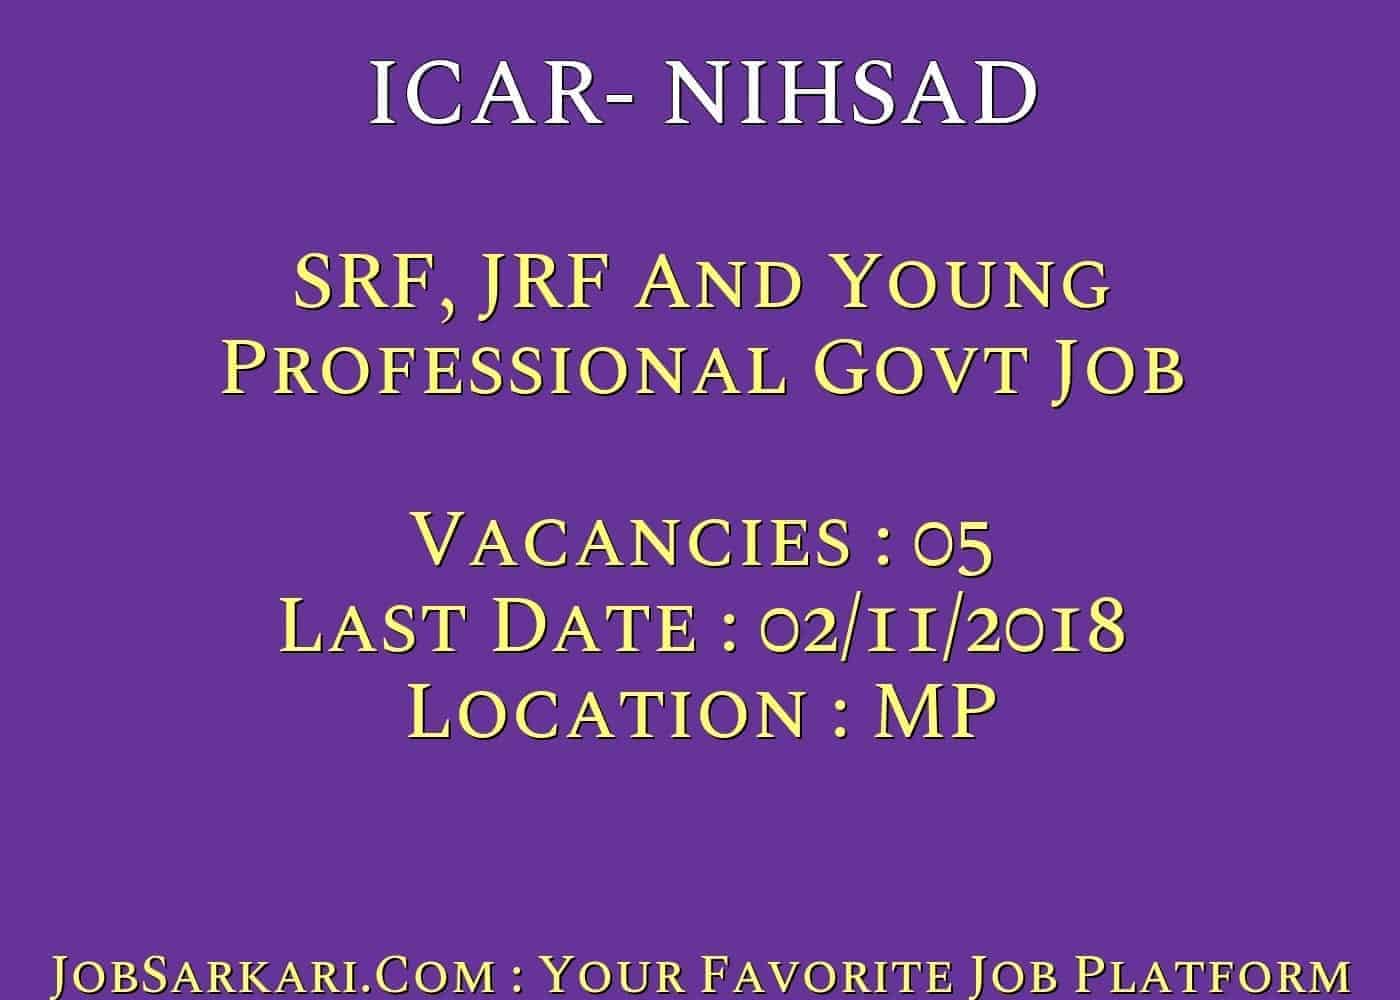 ICAR- NIHSAD Recruitment 2018 For SRF, JRF And Young Professional Govt Job